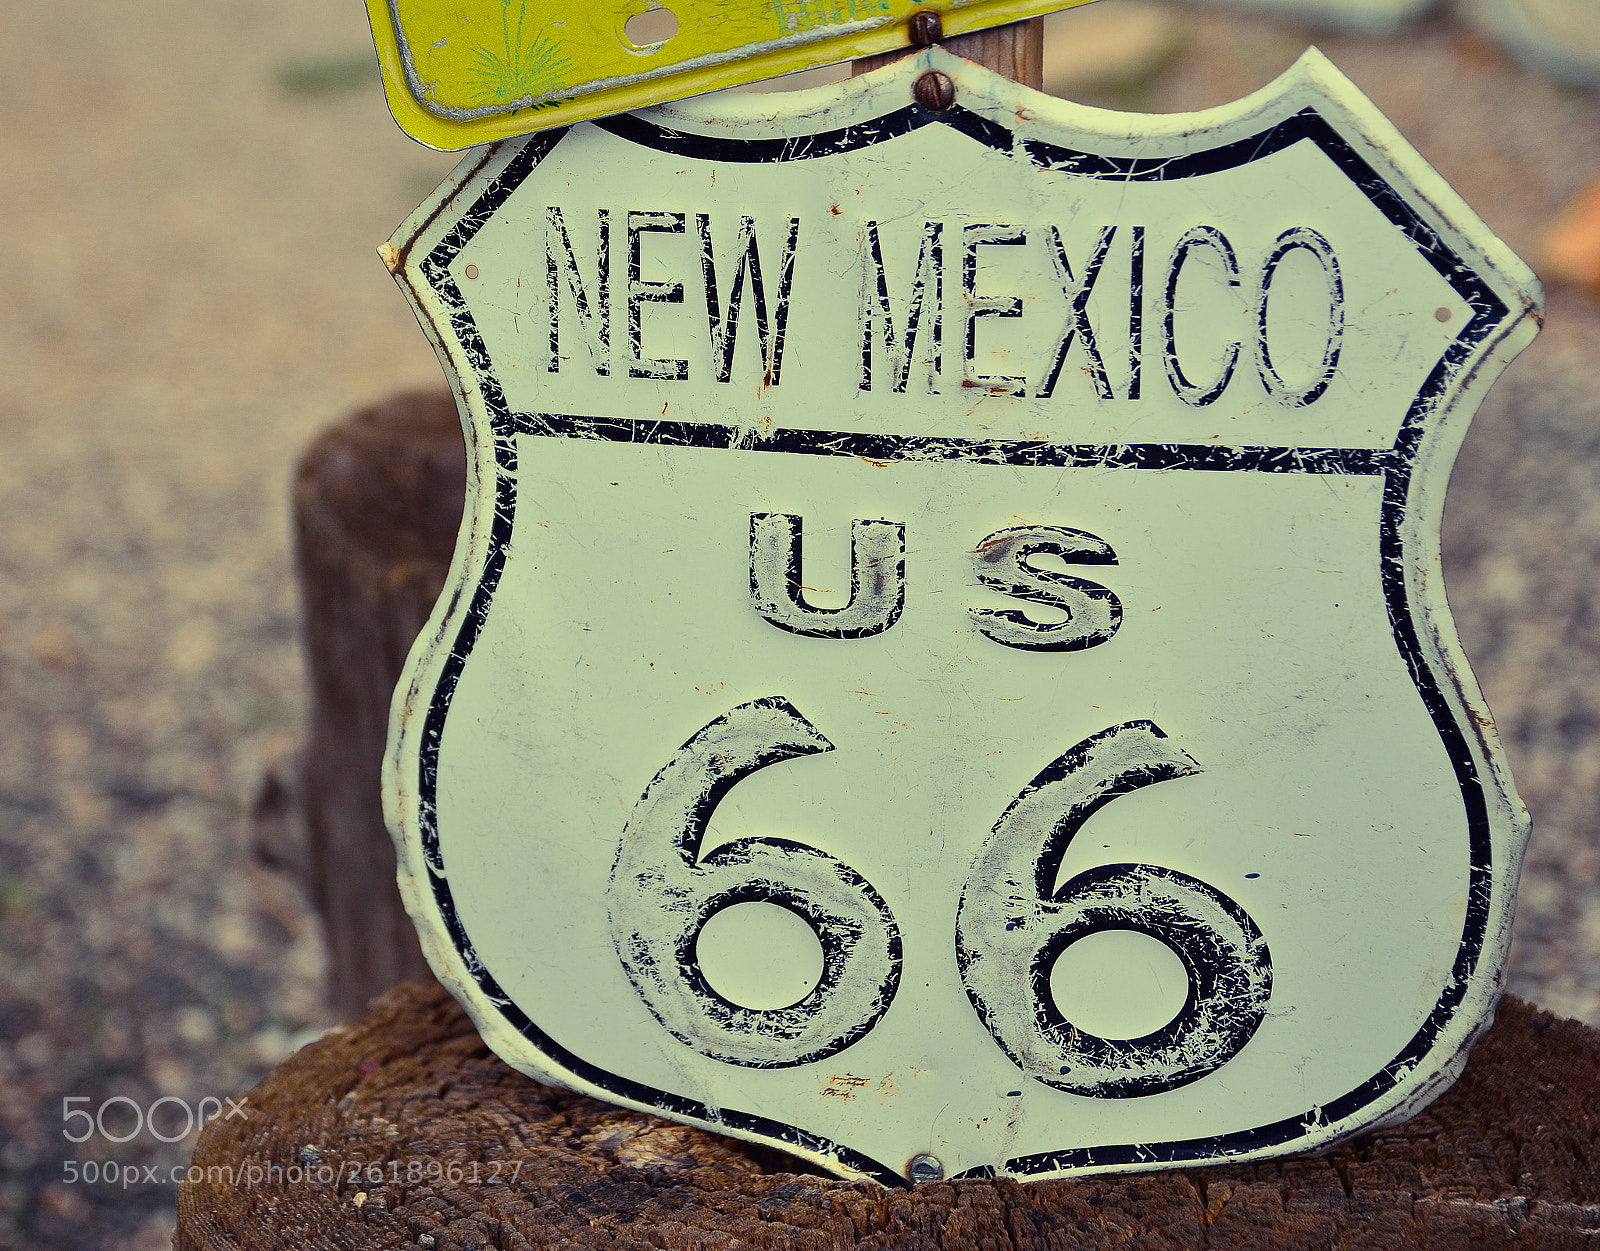 Nikon D7100 sample photo. Route 66 decorations in photography